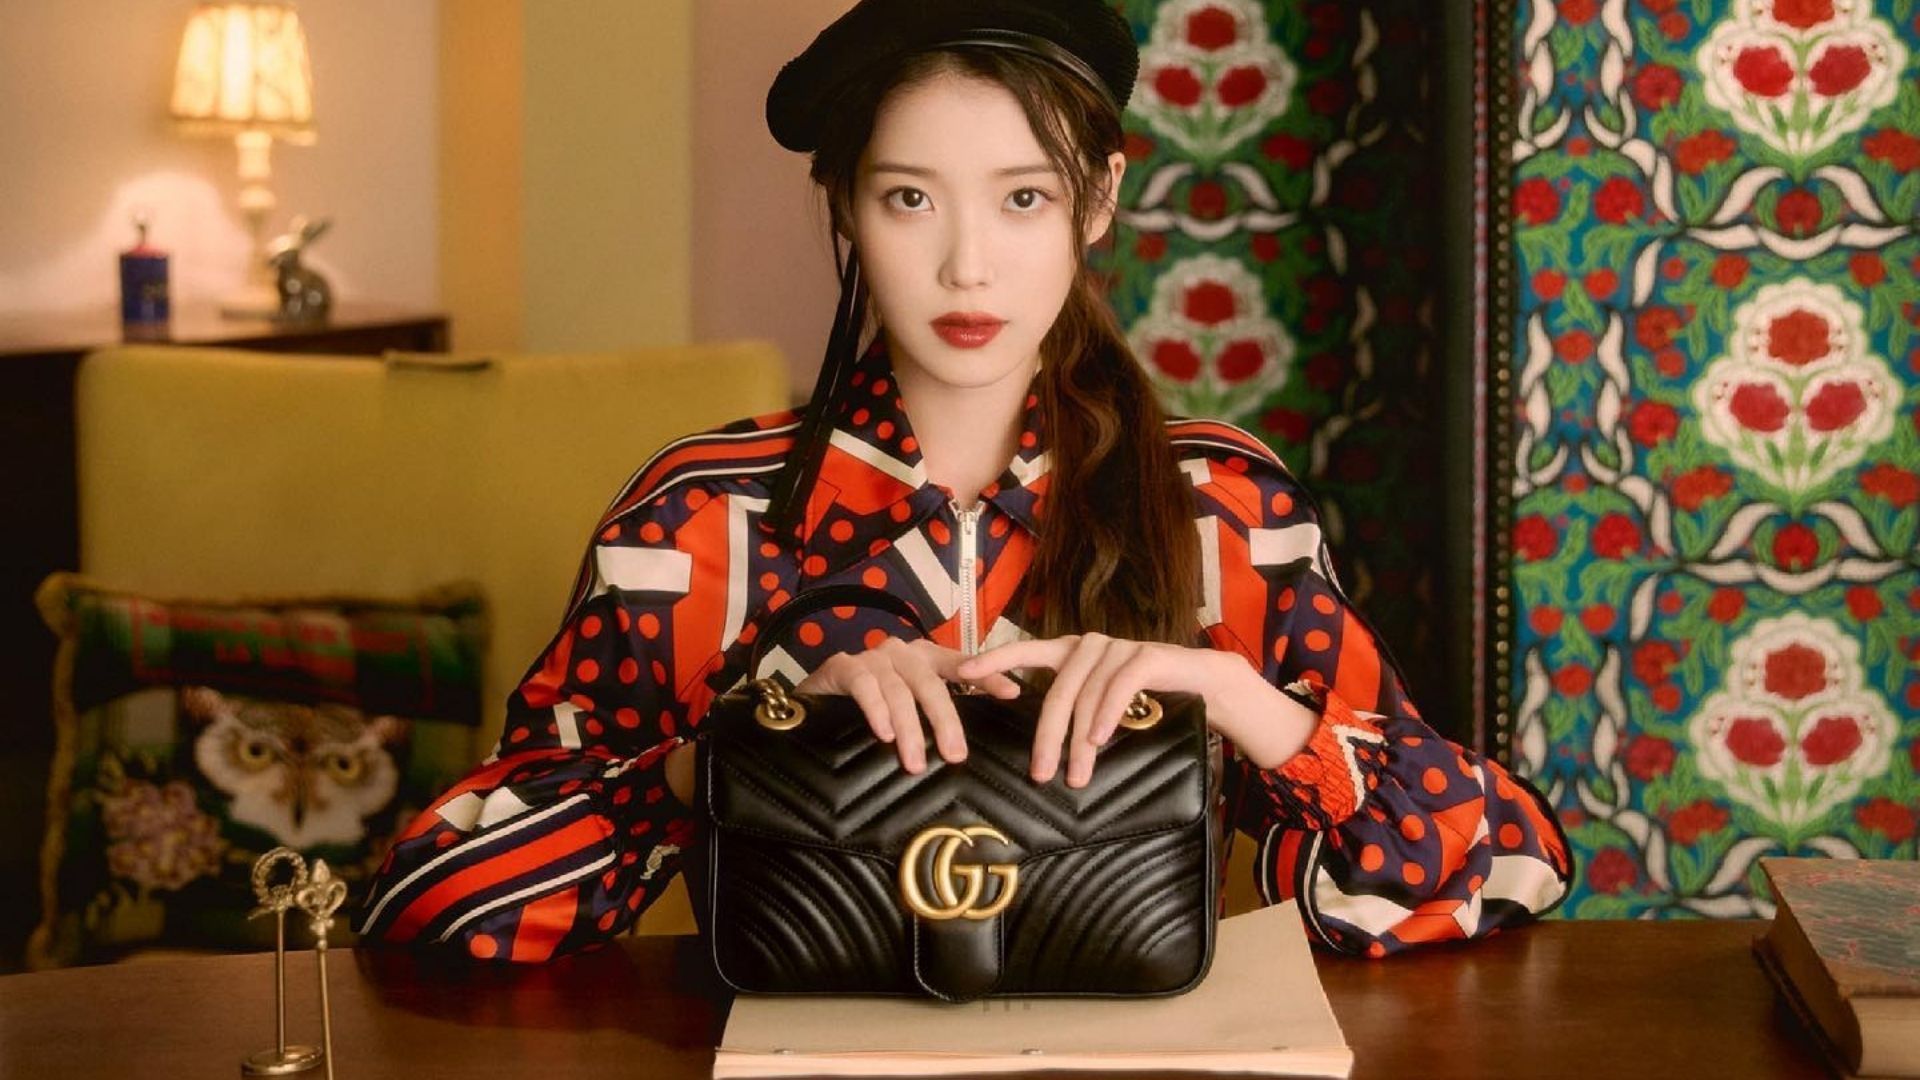 A Guide to the Gucci Marmont Collection: Styles, Sizes & Materials